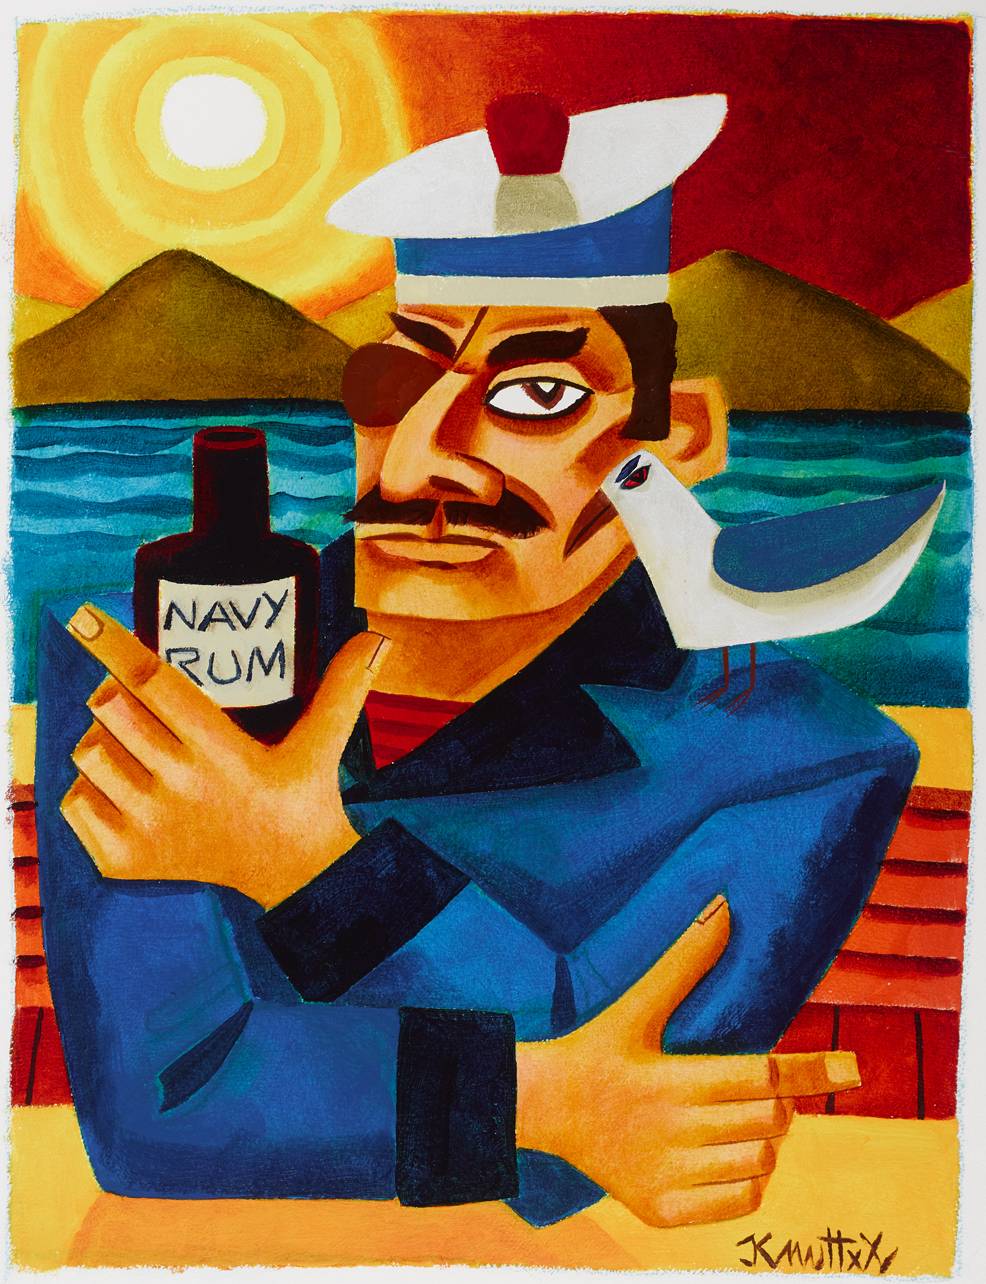 NAVY RUM by Graham Knuttel (b.1954) at Whyte's Auctions